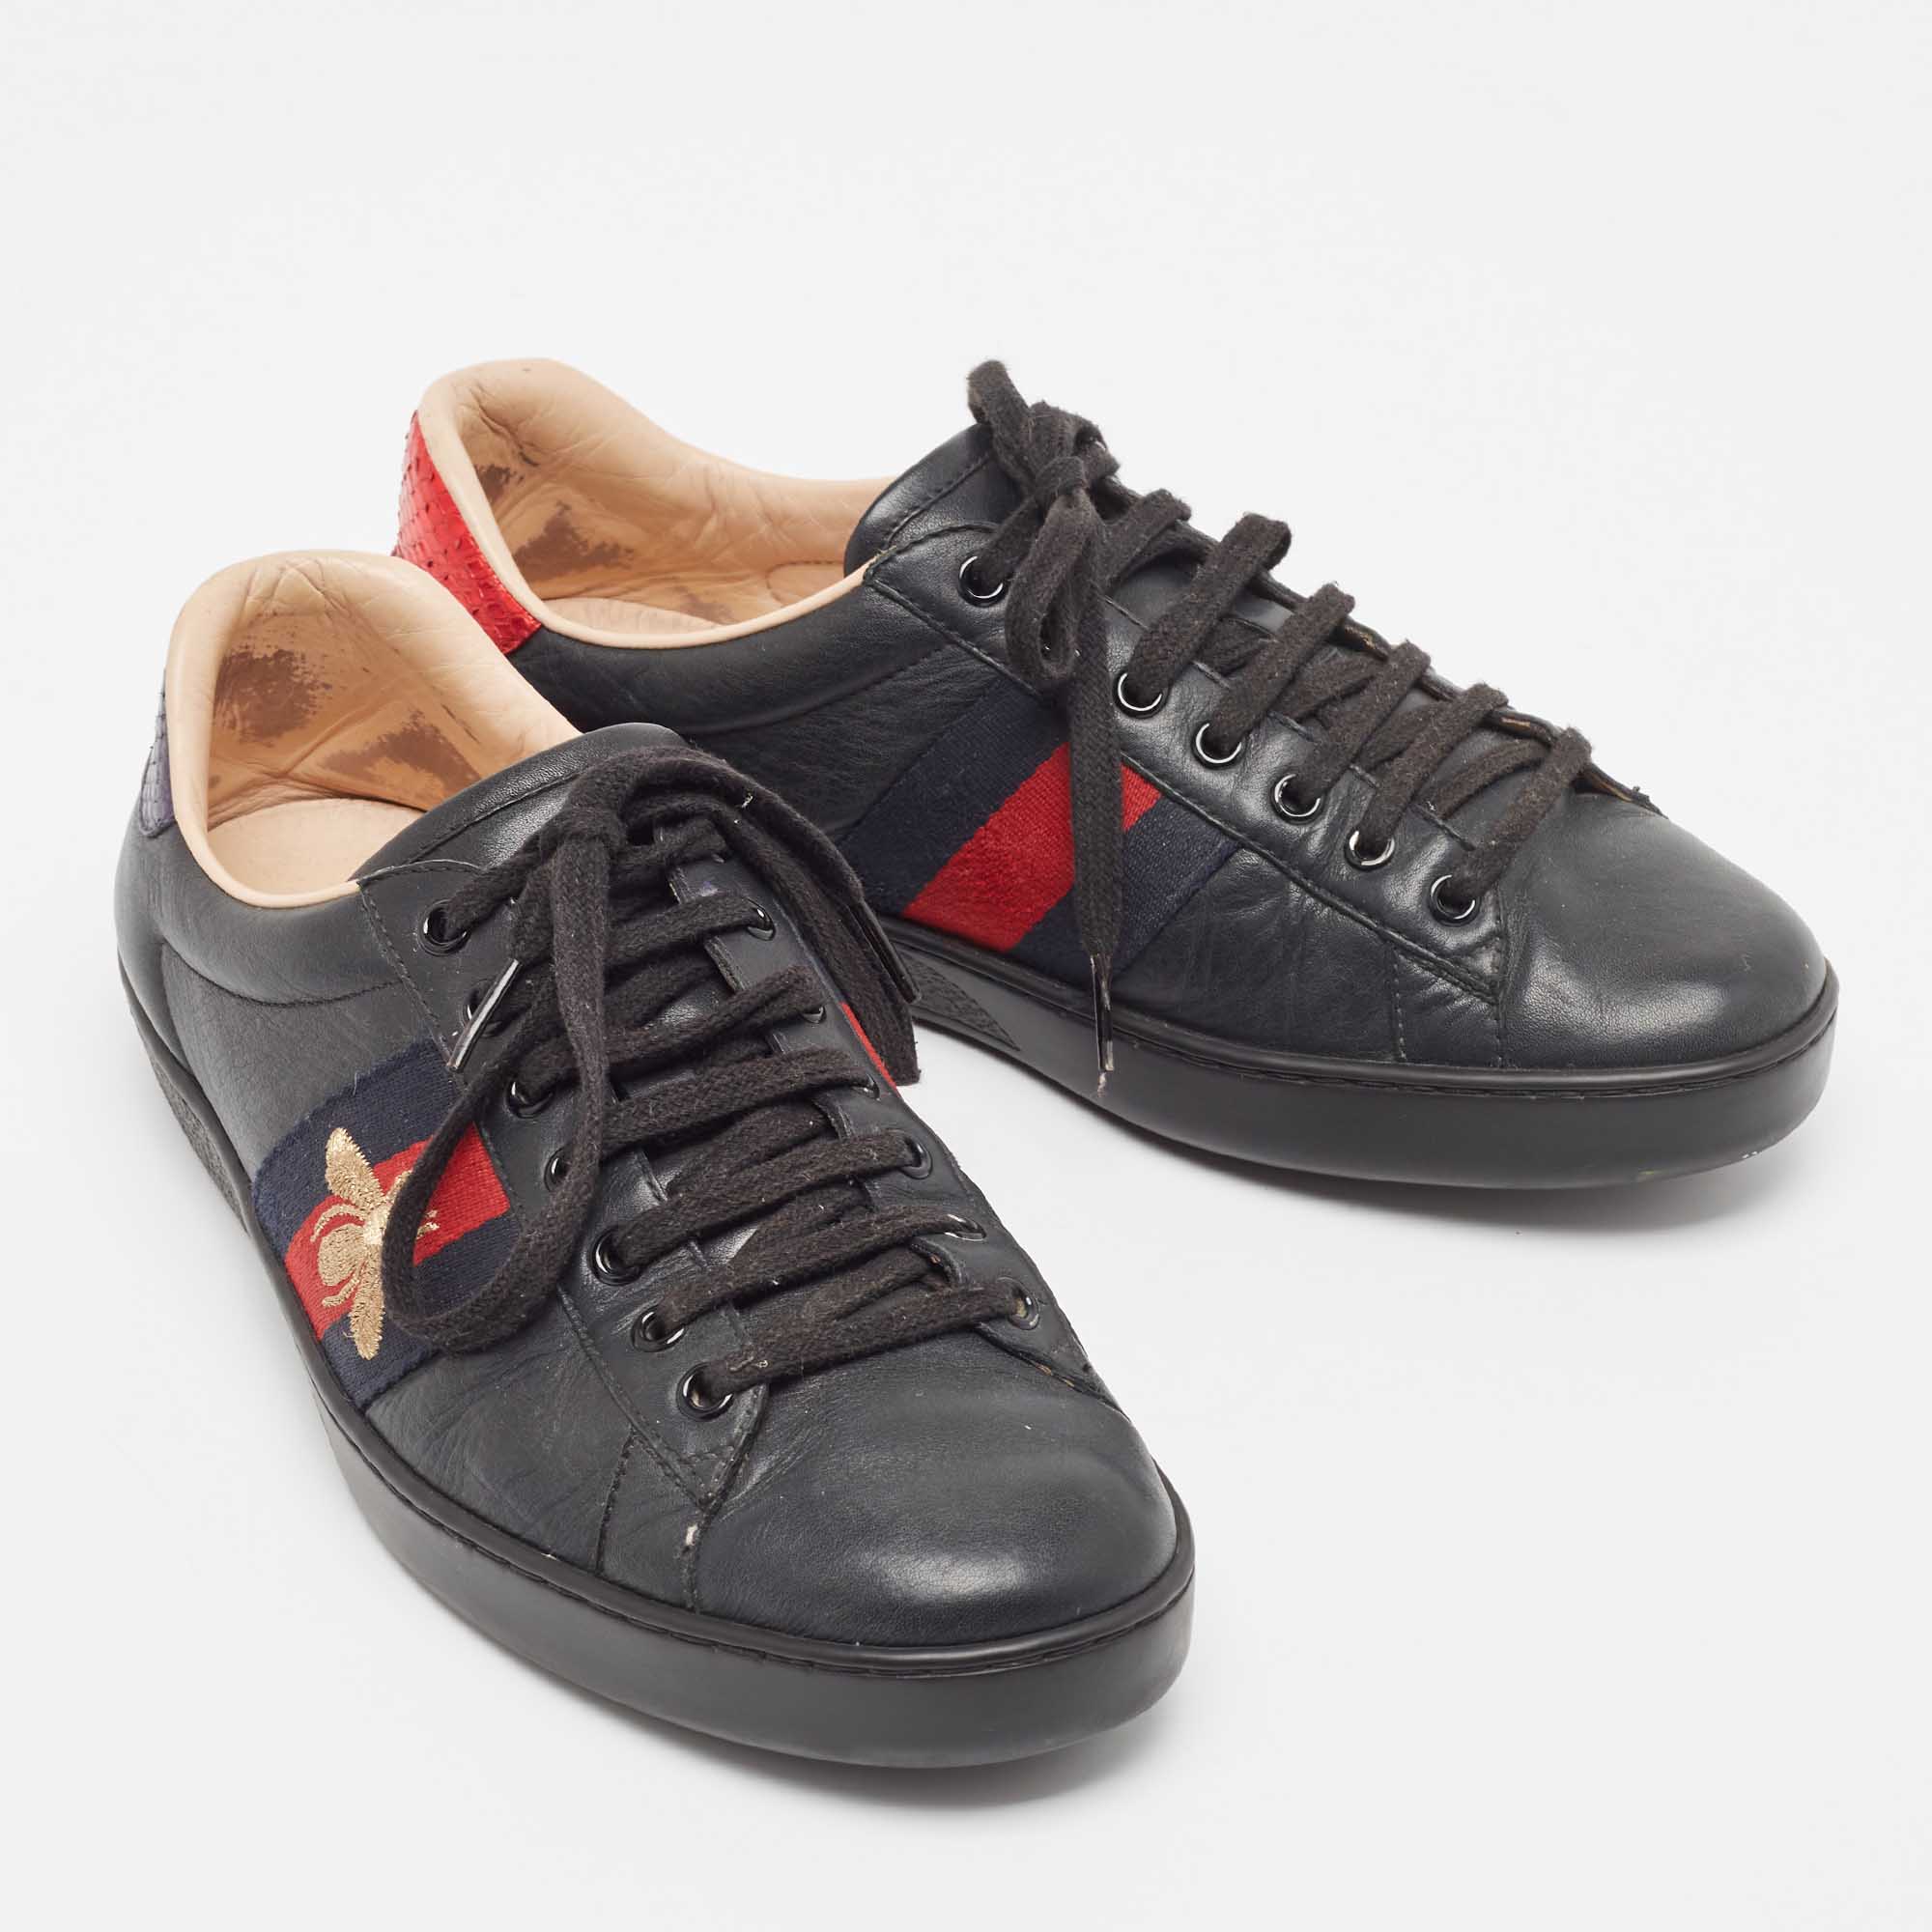 Gucci Black Leather Embroidered Bee Ace Sneakers Size 41.5